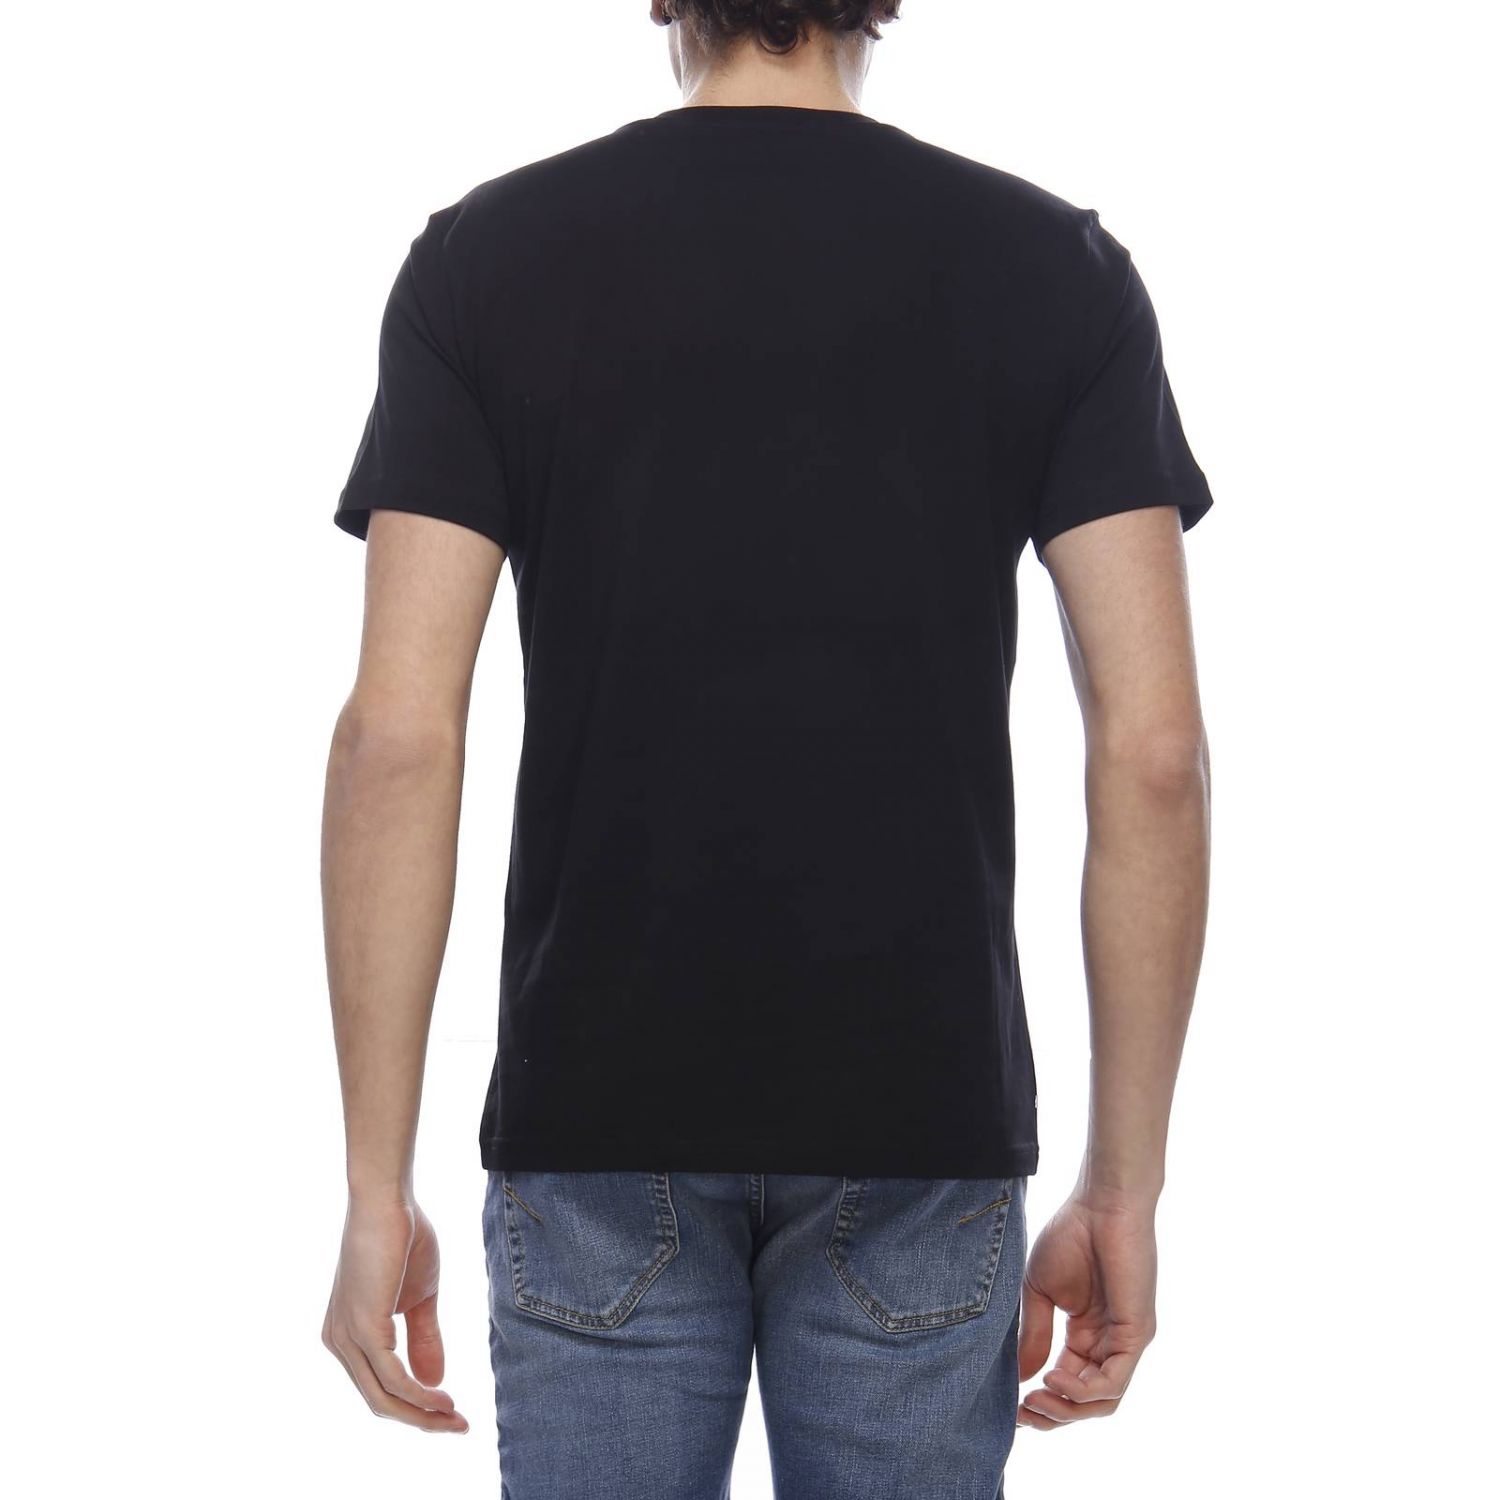 Moschino Couture Outlet: T-shirt men - Black | T-Shirt Moschino Couture ...